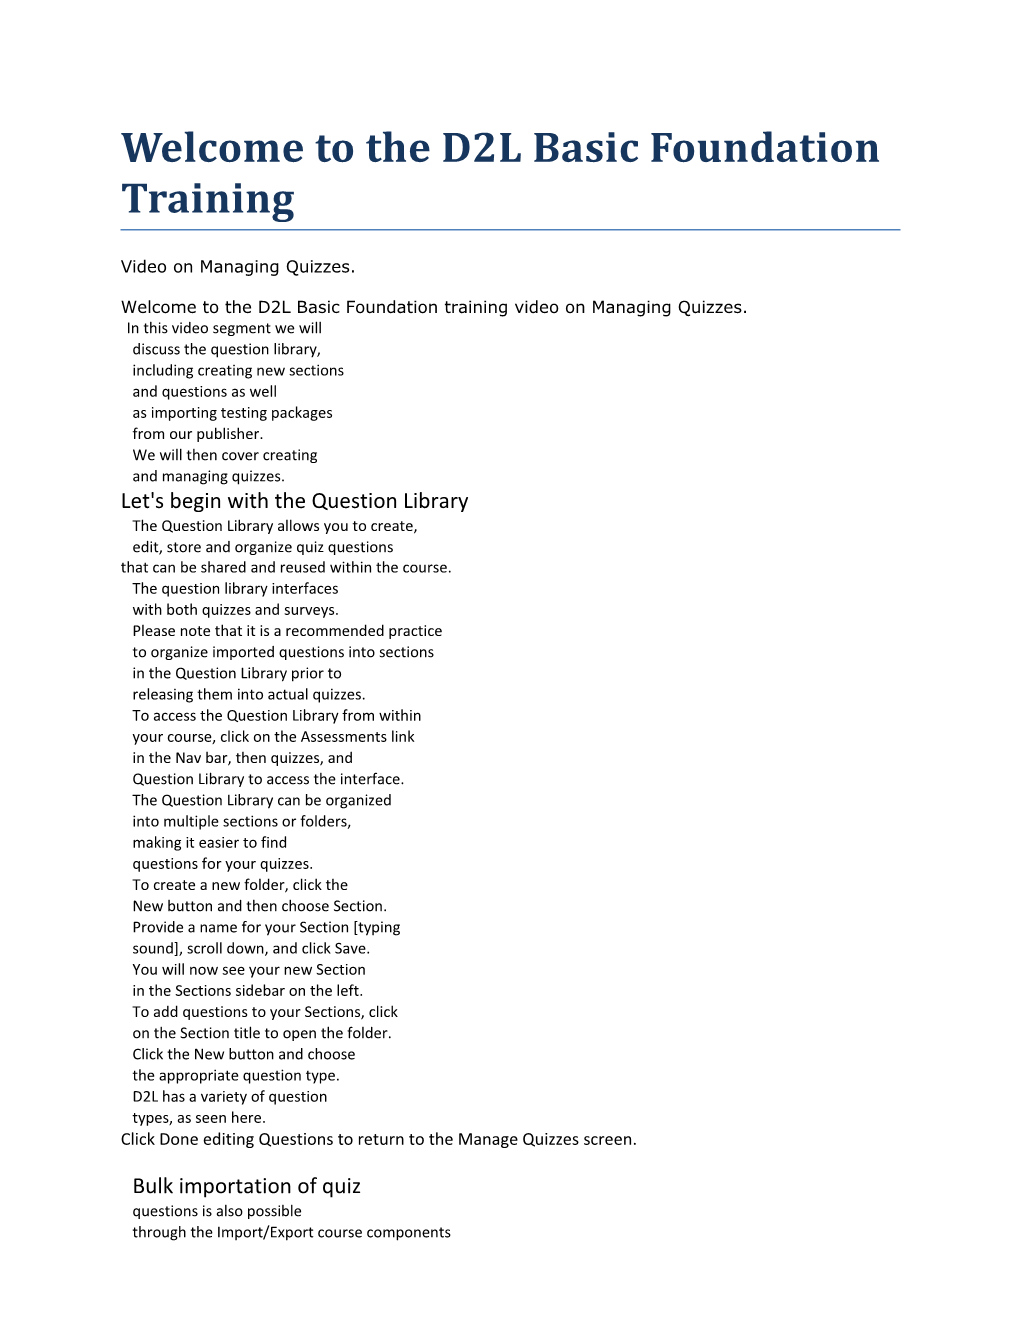 Welcome to the D2L Basic Foundation Training